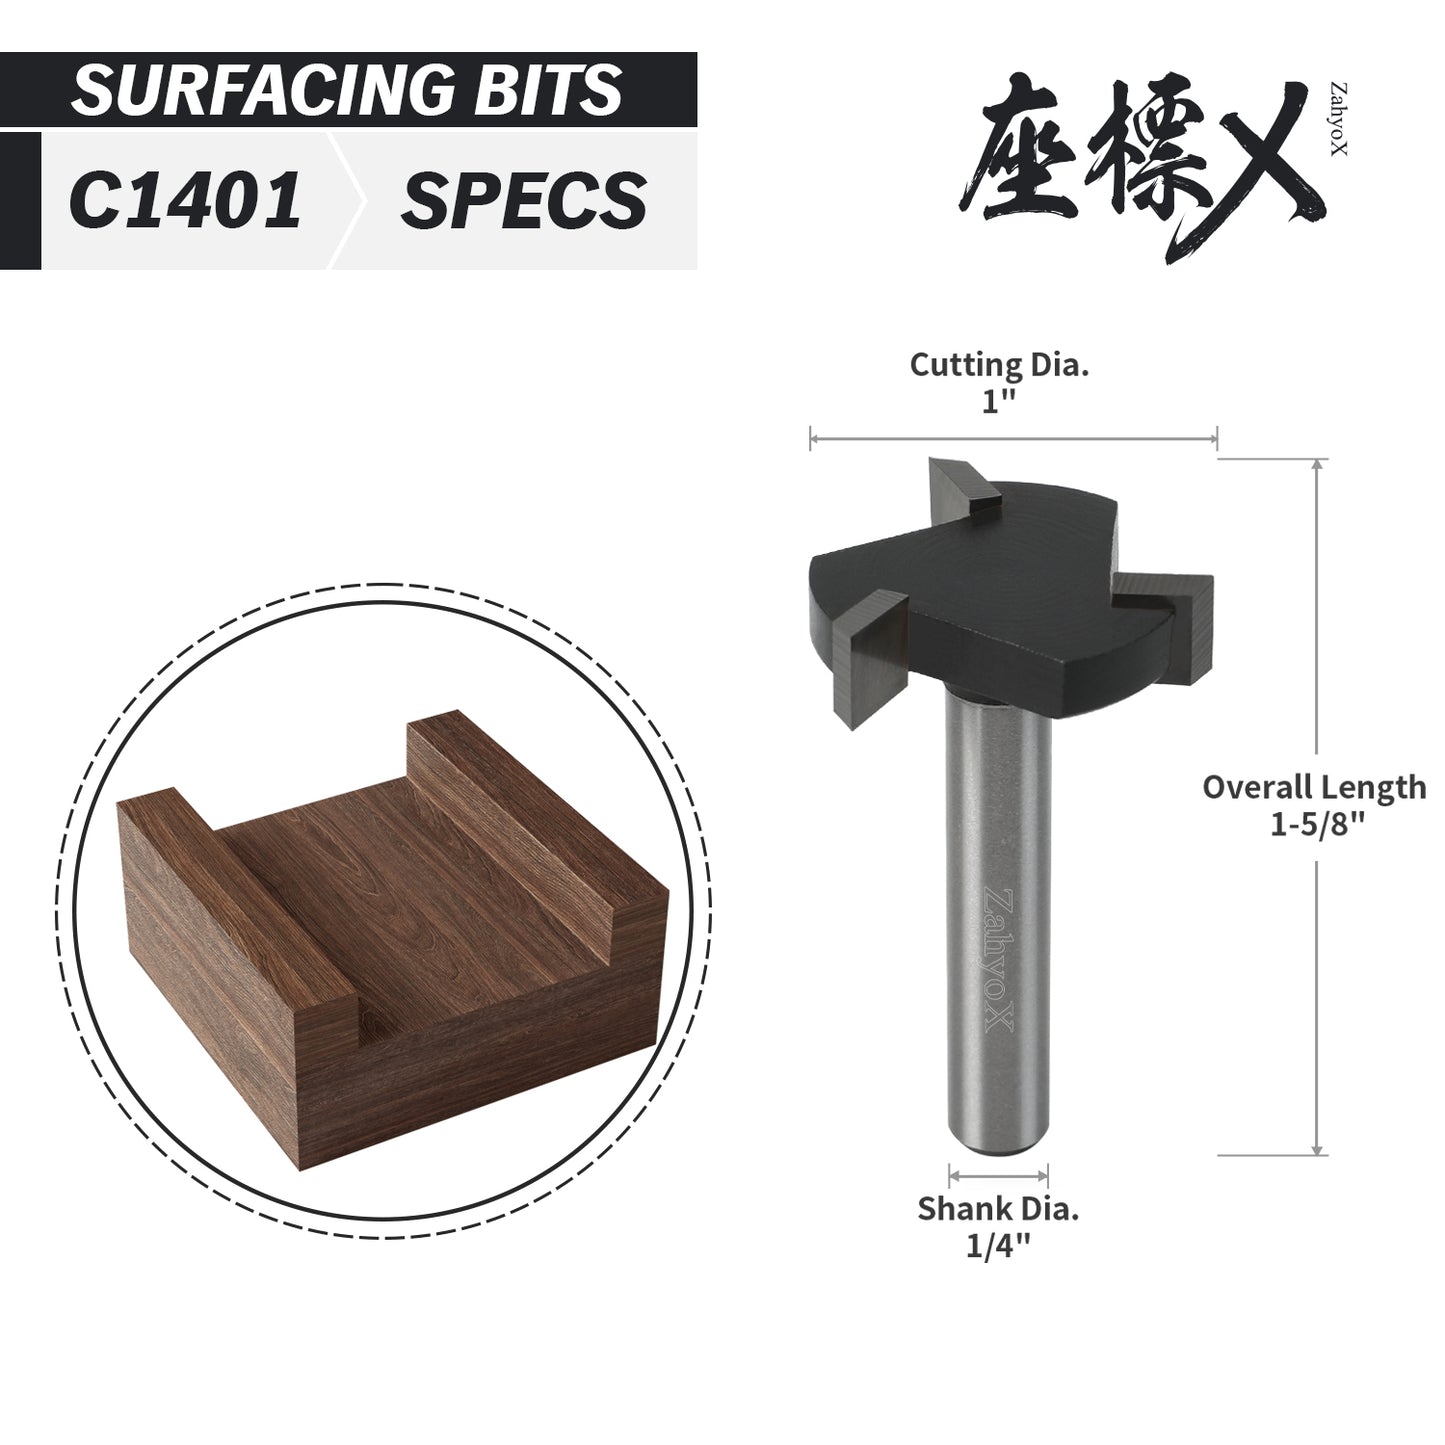 C1401 Spoilboard Surfacing Mill Router Bit - 3 Flutes - 1/4 SD - 1 CD - 1/4 CL - 1-5/8 OL